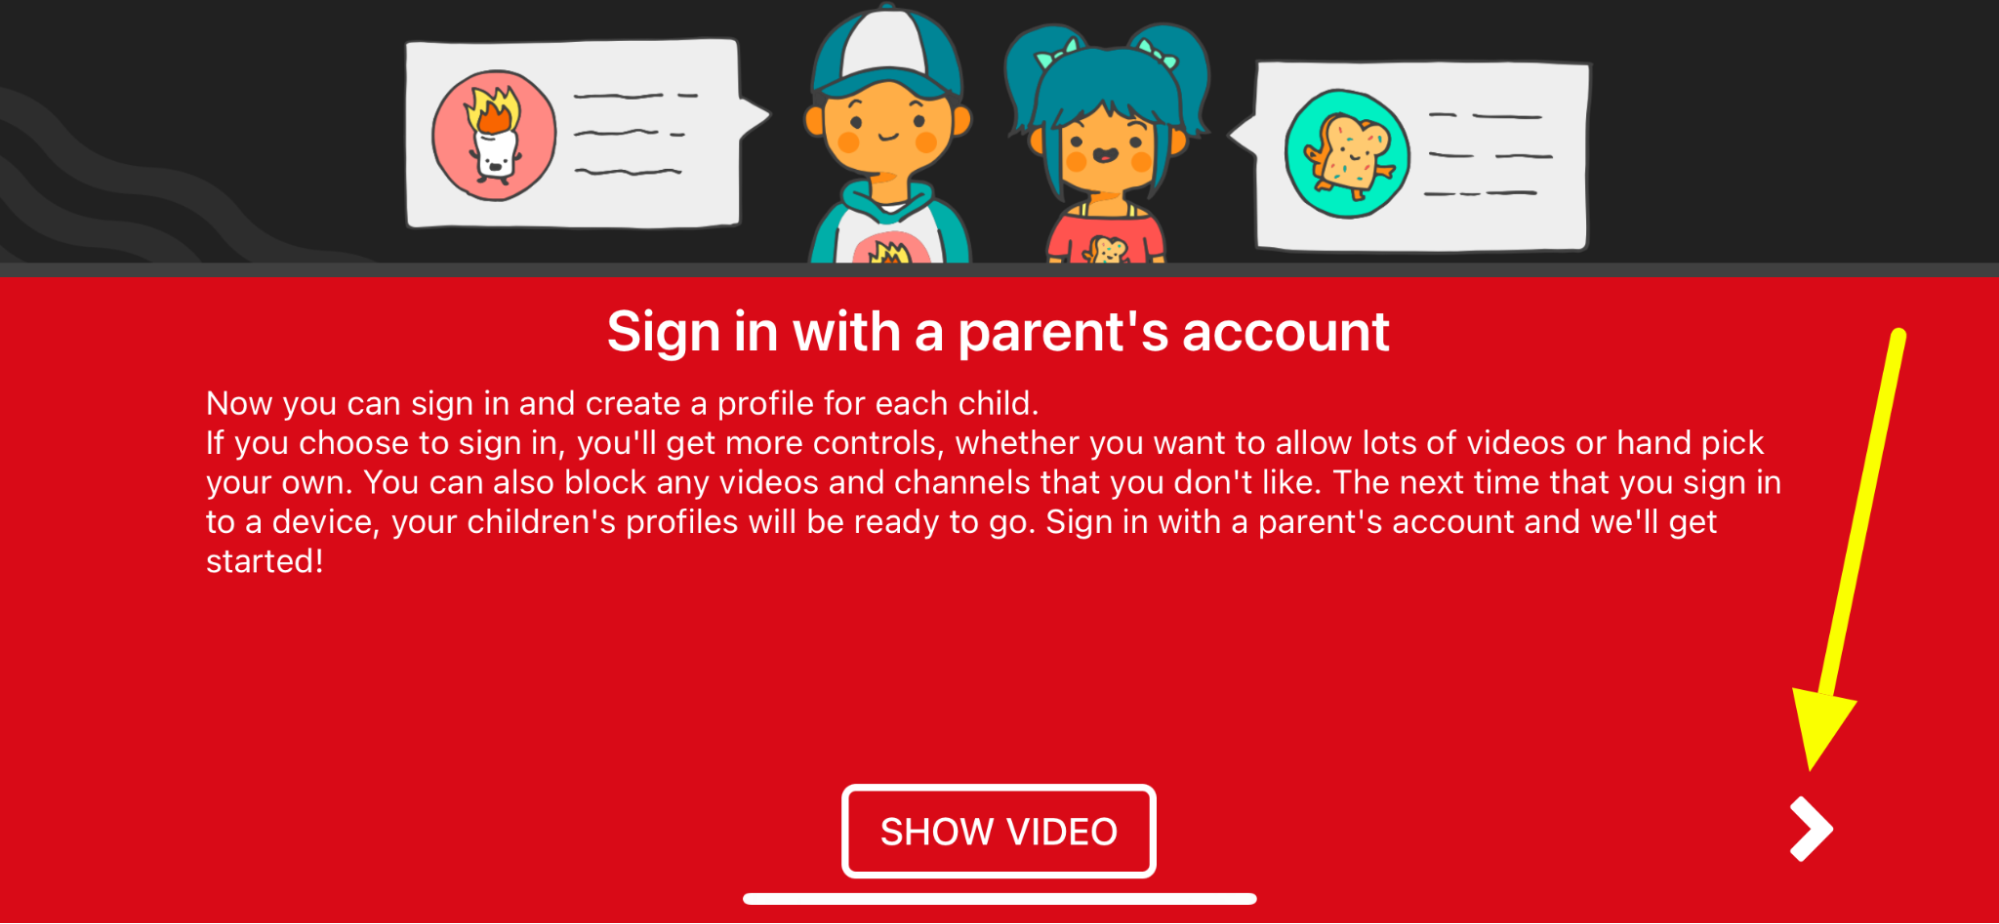 How to put parental controls on YouTube 33